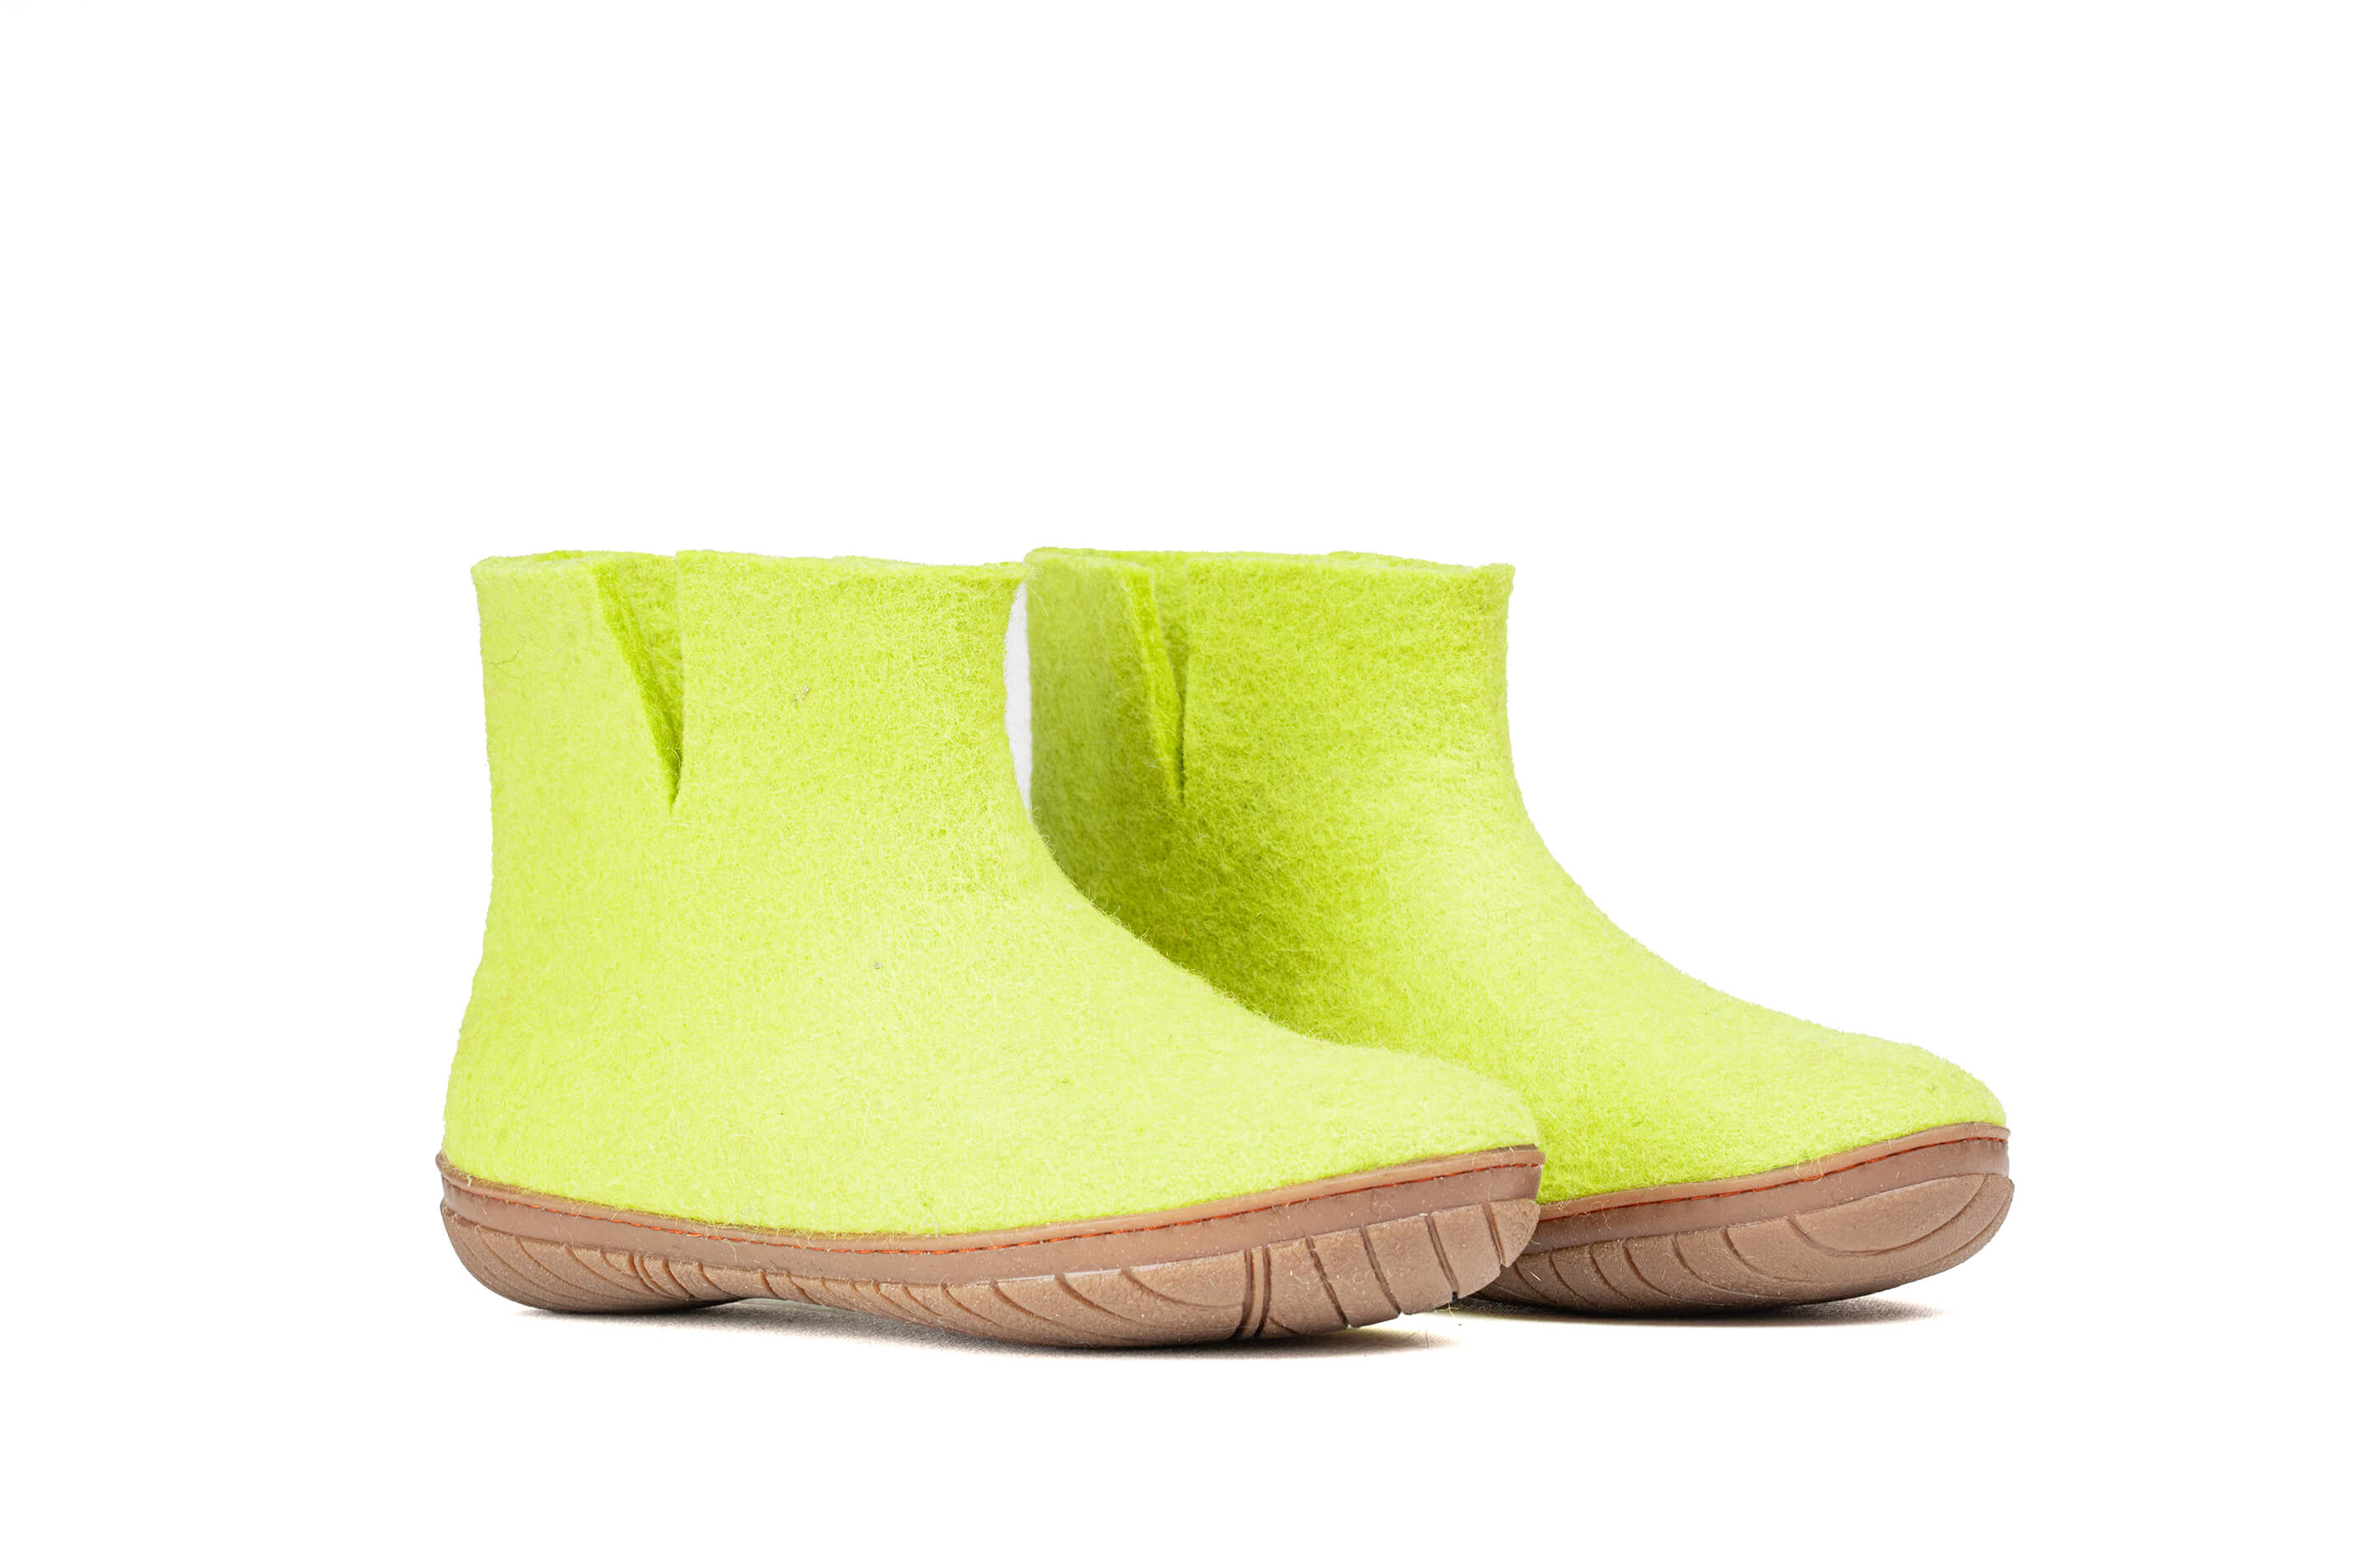 Outdoor Low Boots With Rubber Sole - Lime Green